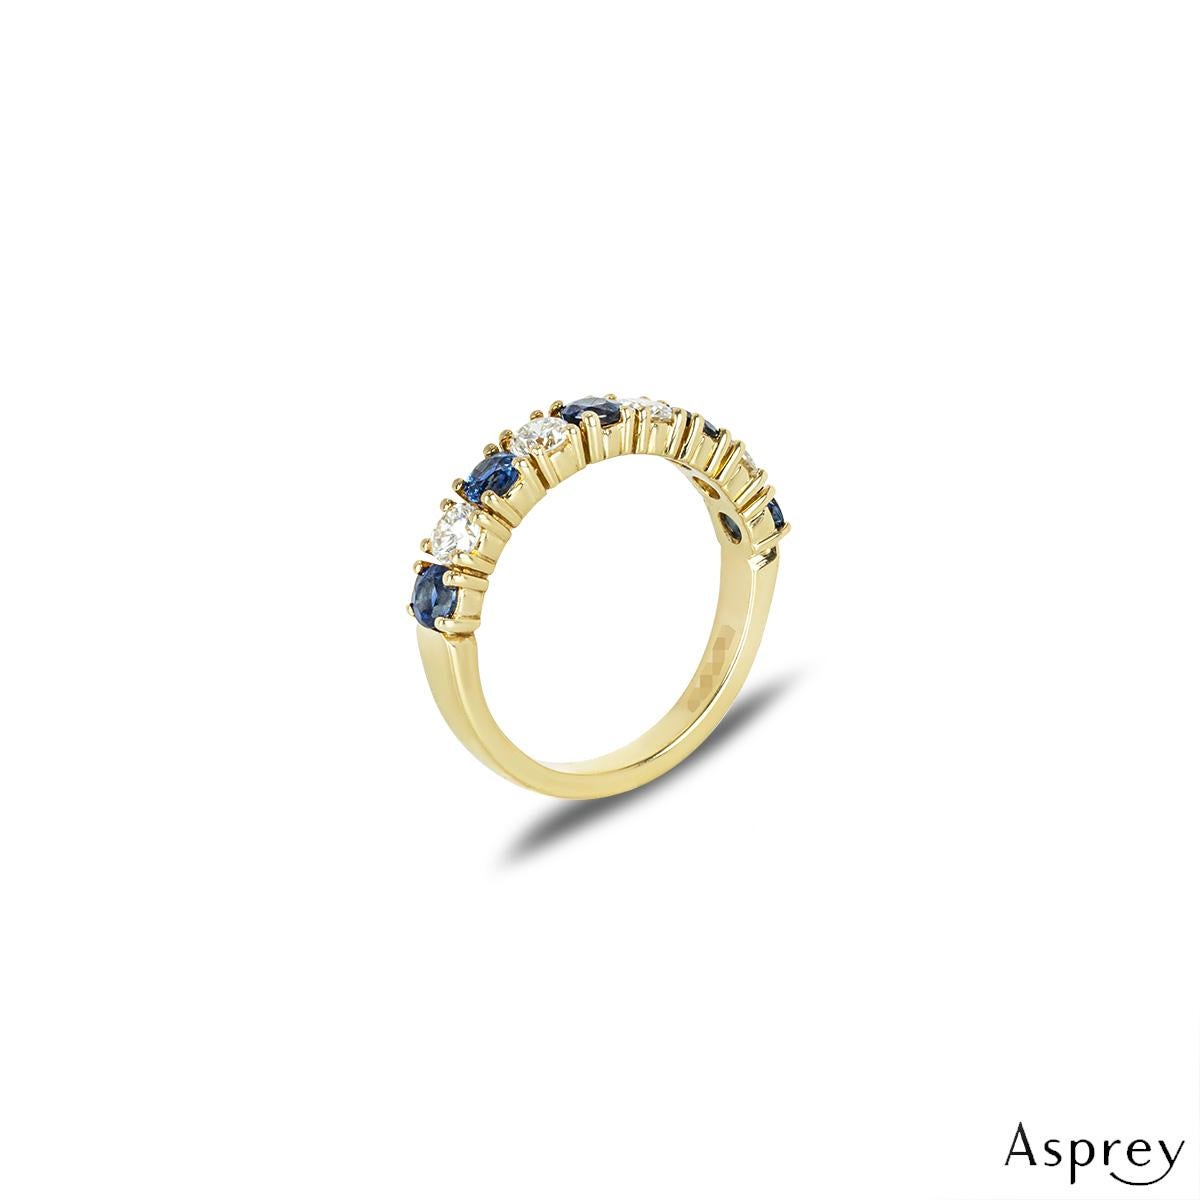 A lovely 18k yellow gold sapphire and diamond half eternity ring by Asprey. The ring features an alternating design of sapphires and diamonds in a four prong setting. The 5 round cut sapphires have an approximate total weight of 0.90ct and display a